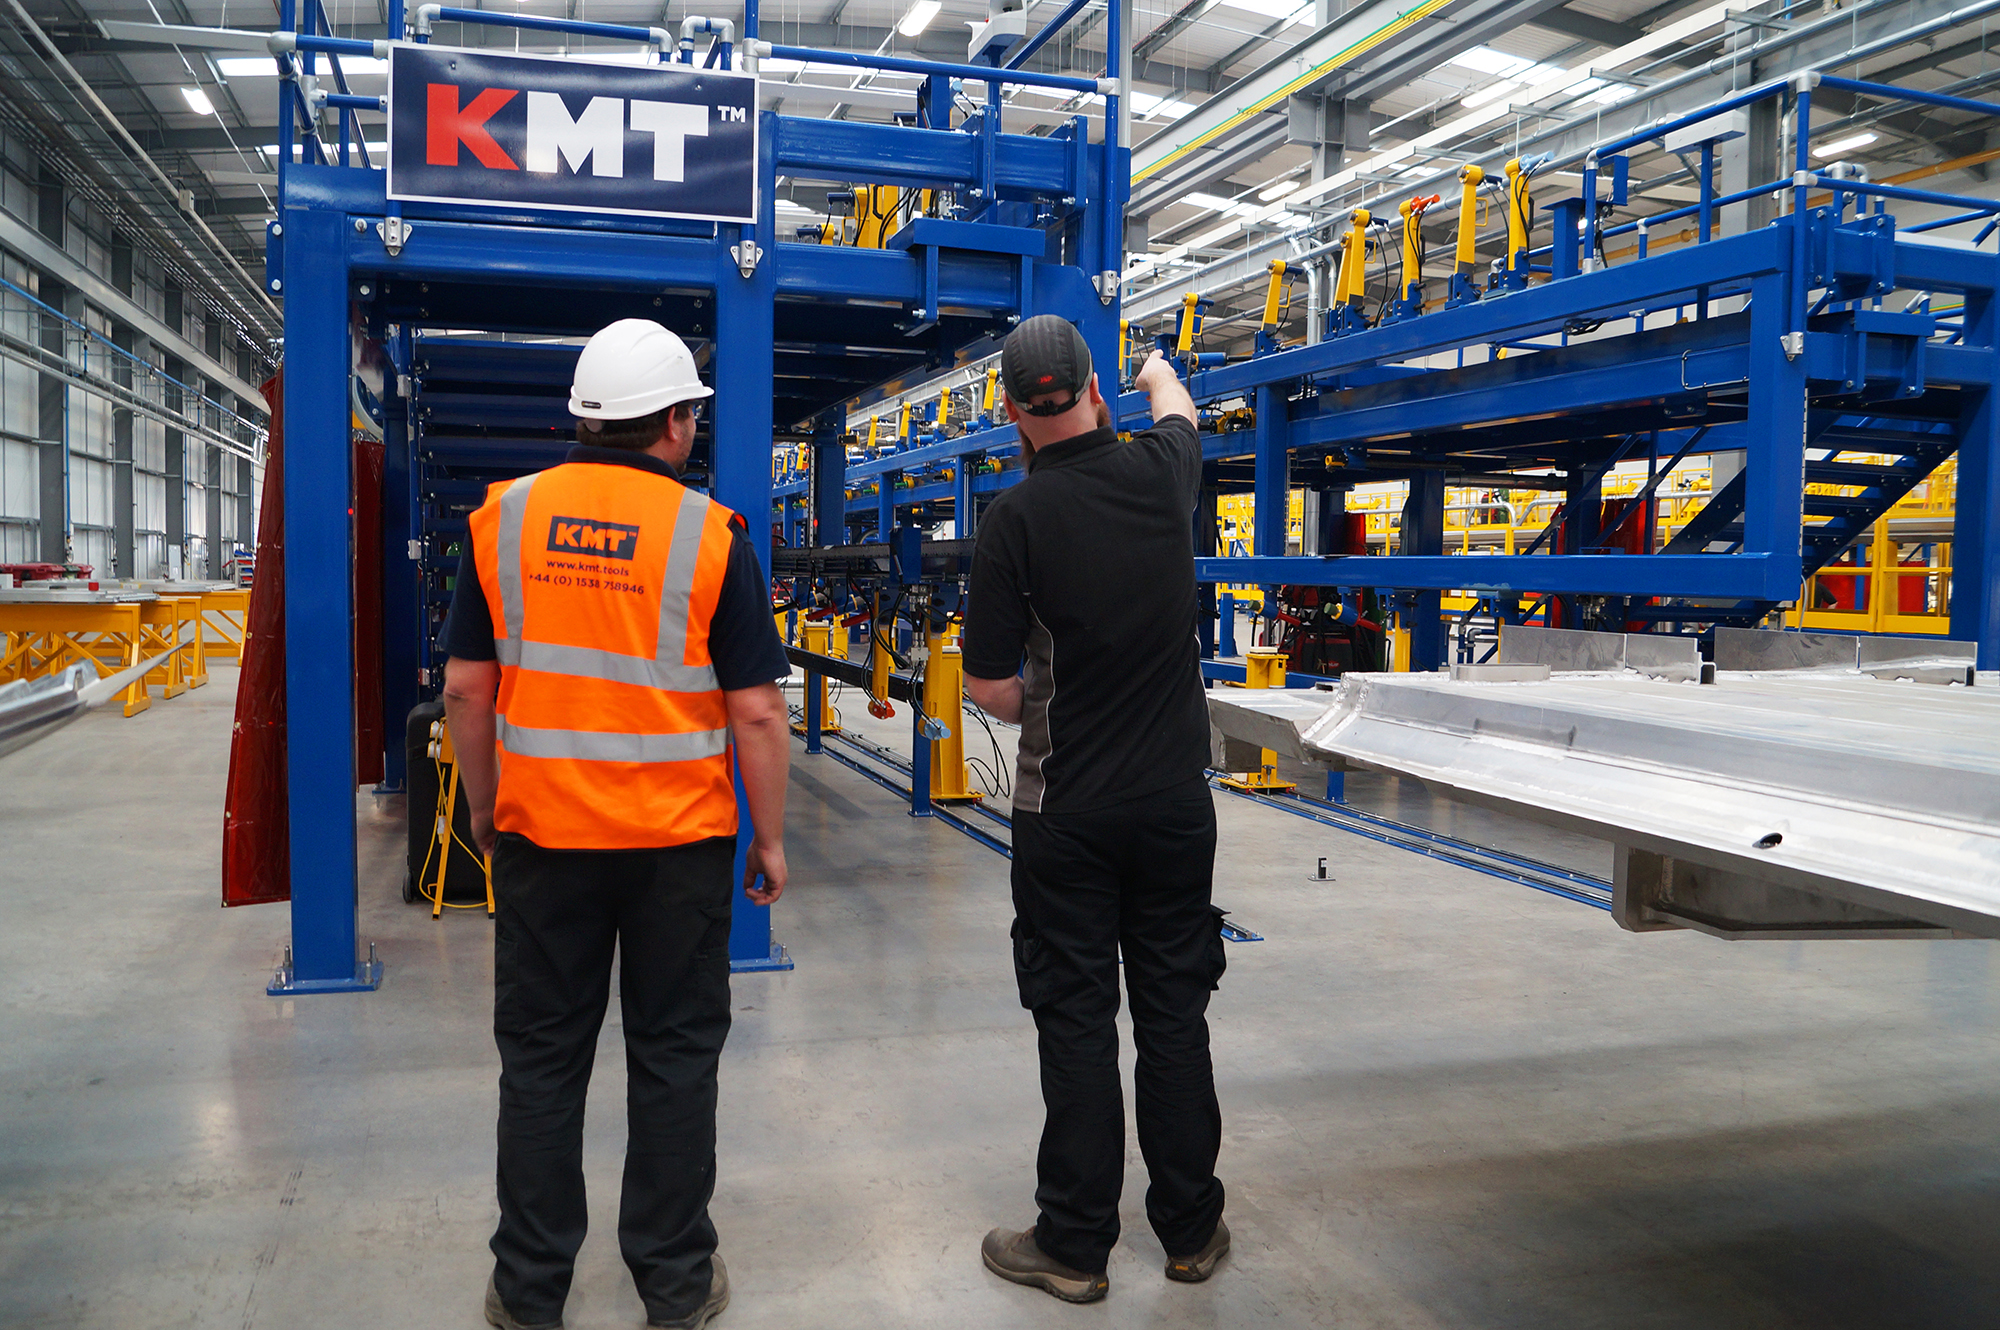 KM Tools ‘Smart Jig’ installed onsite at Hitachi Rail in Newton Aycliffe